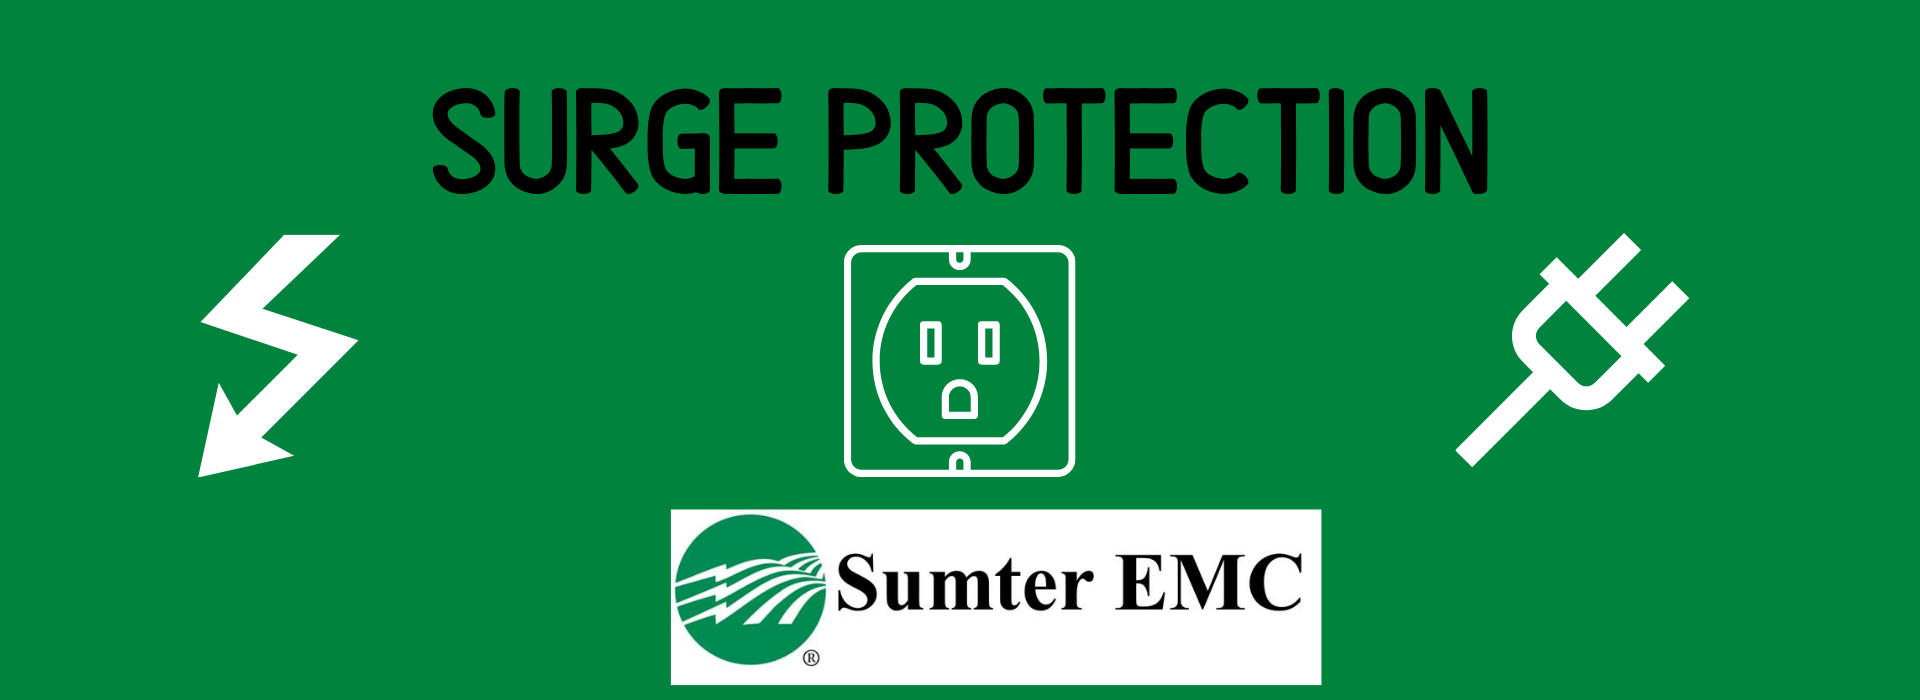 Surge Protection.png